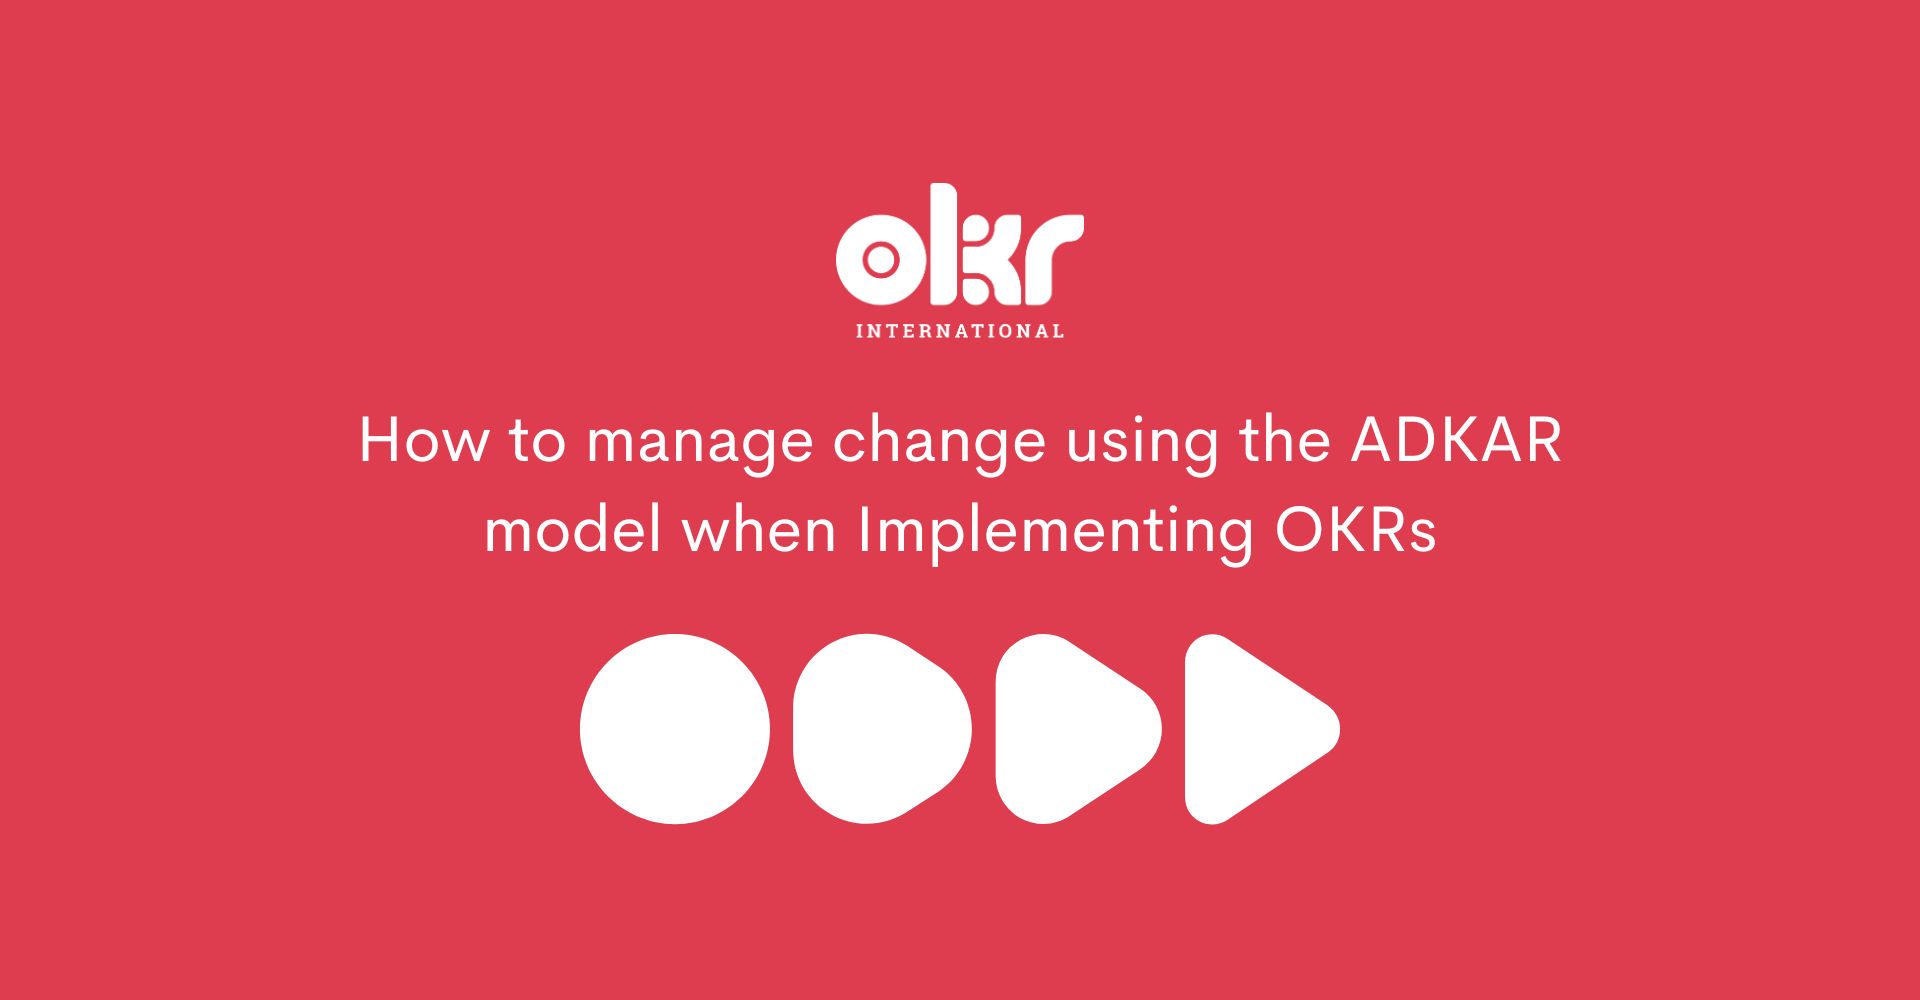 How to manage change using the ADKAR model when Implementing OKRs